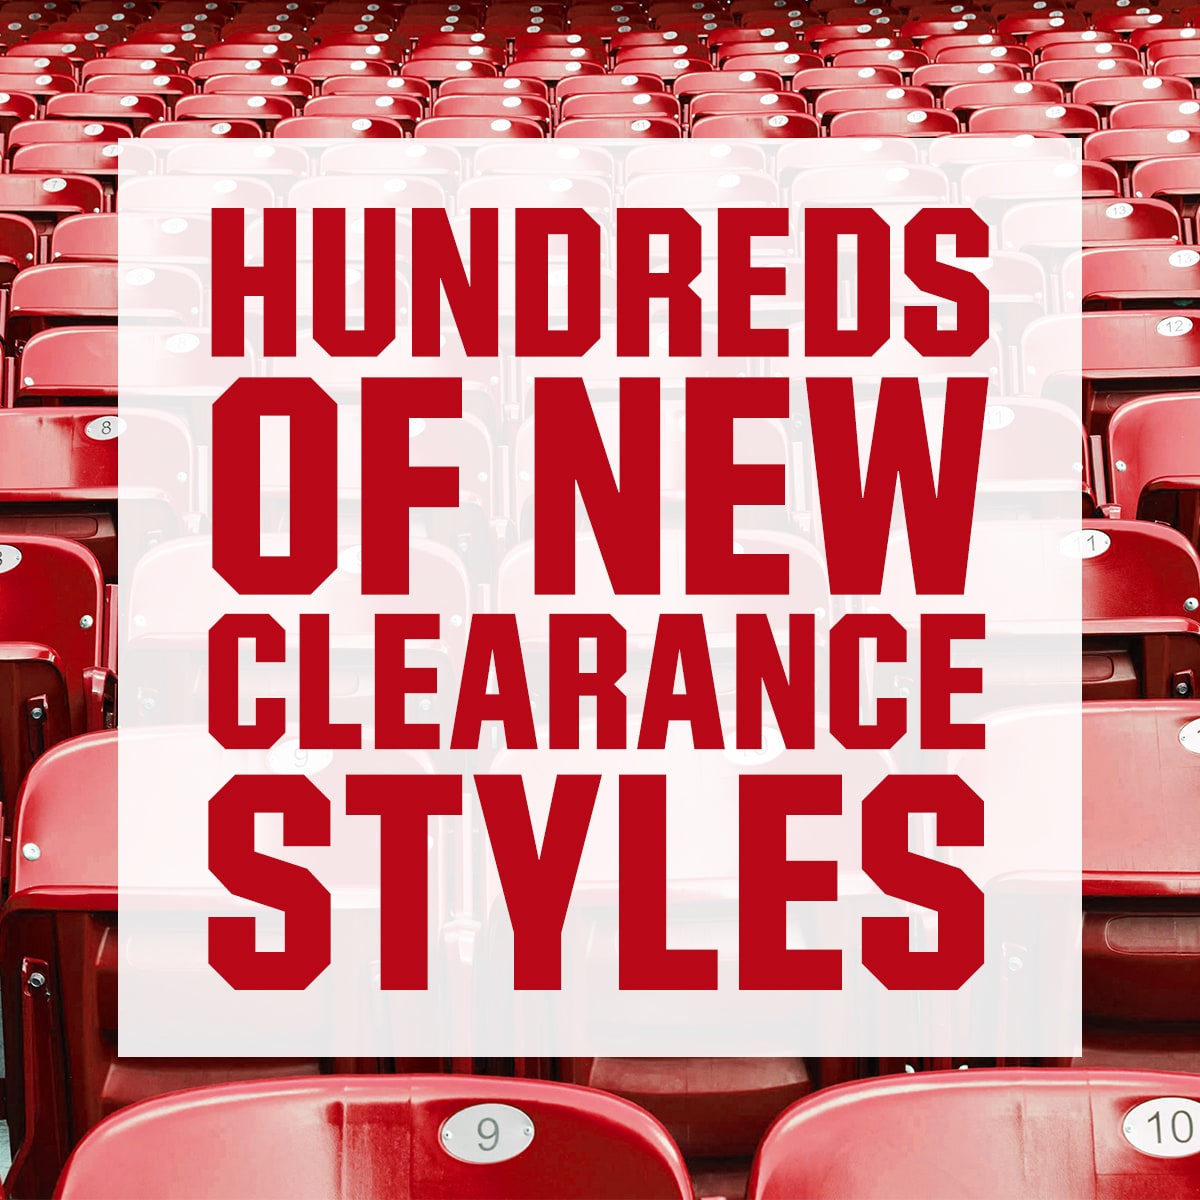 Hundreds of new clearance styles.